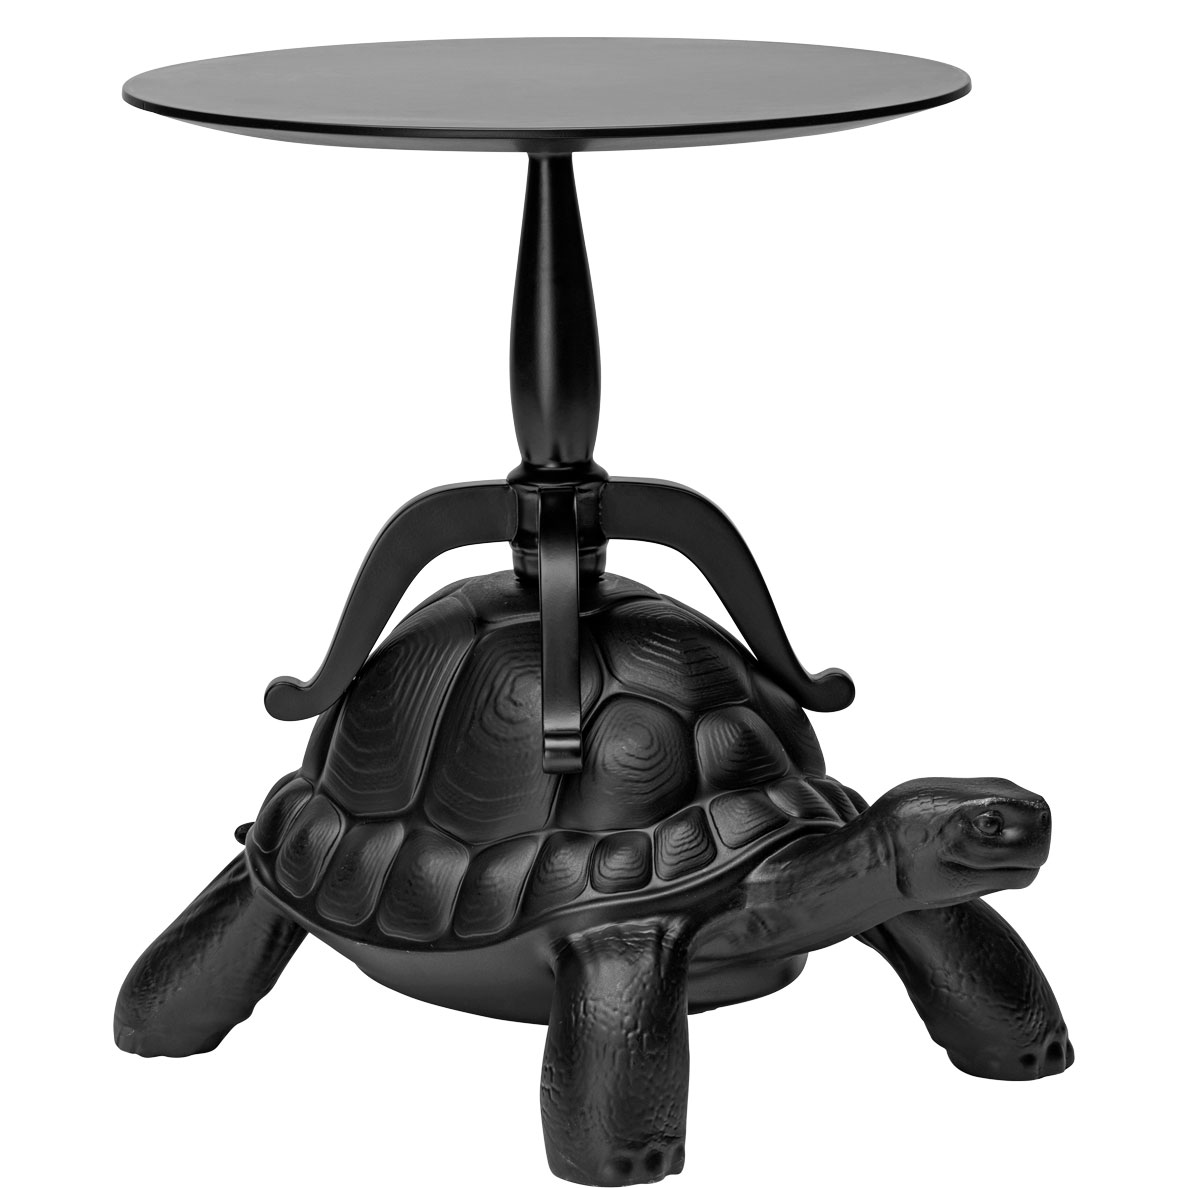 Turtle Carry Coffee Table by Qeeboo, 36003BL